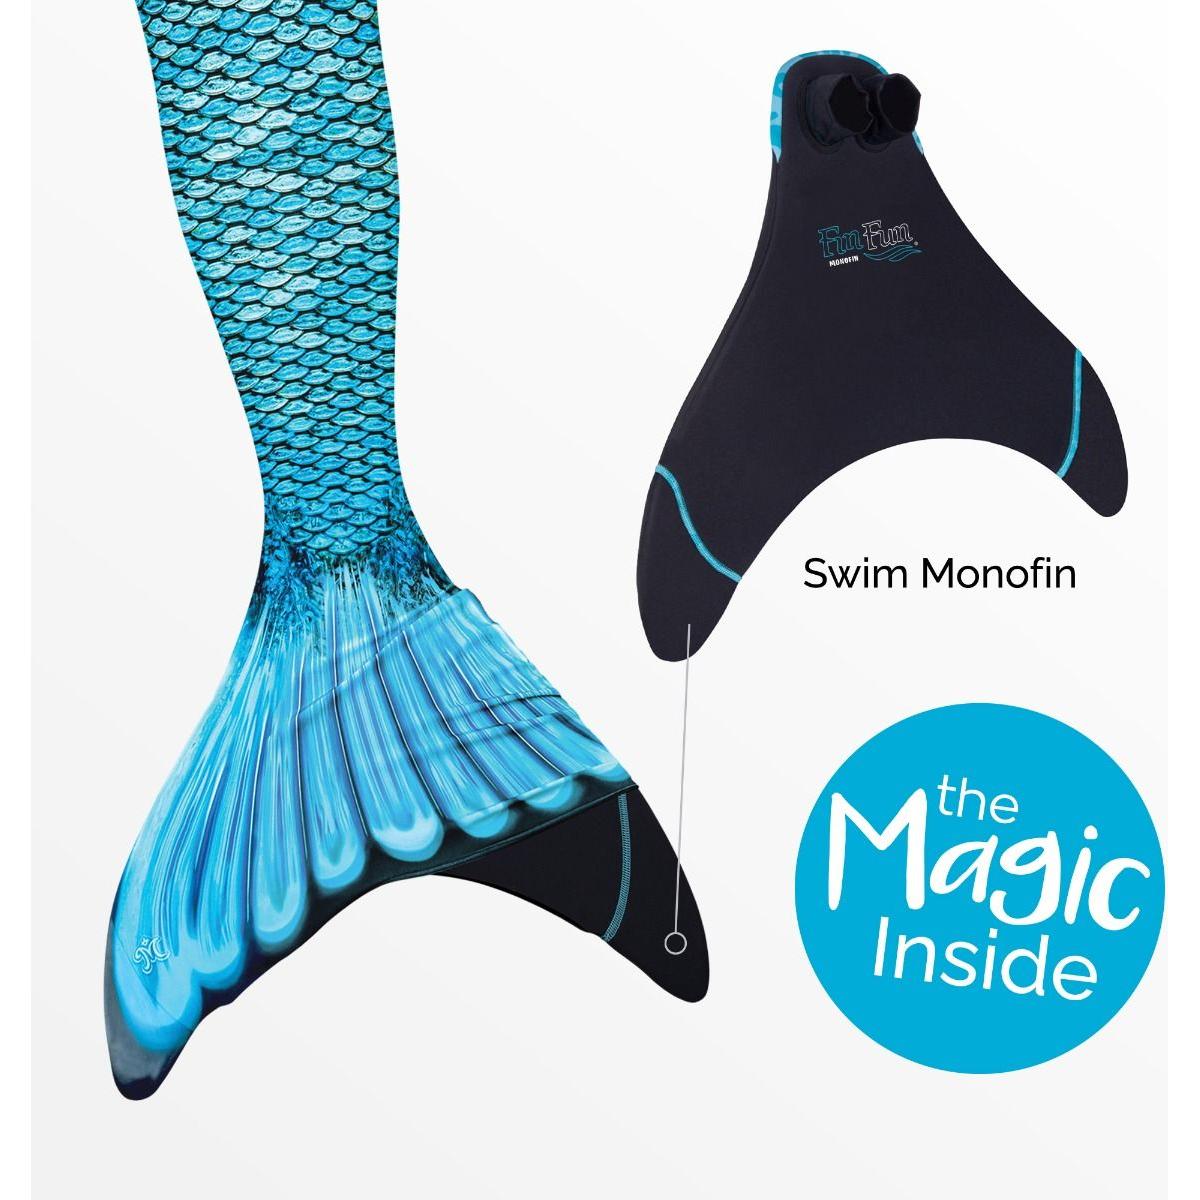 Fin Fun Mermaid Tail with Monofin Mariana's Teal Adult Large – The